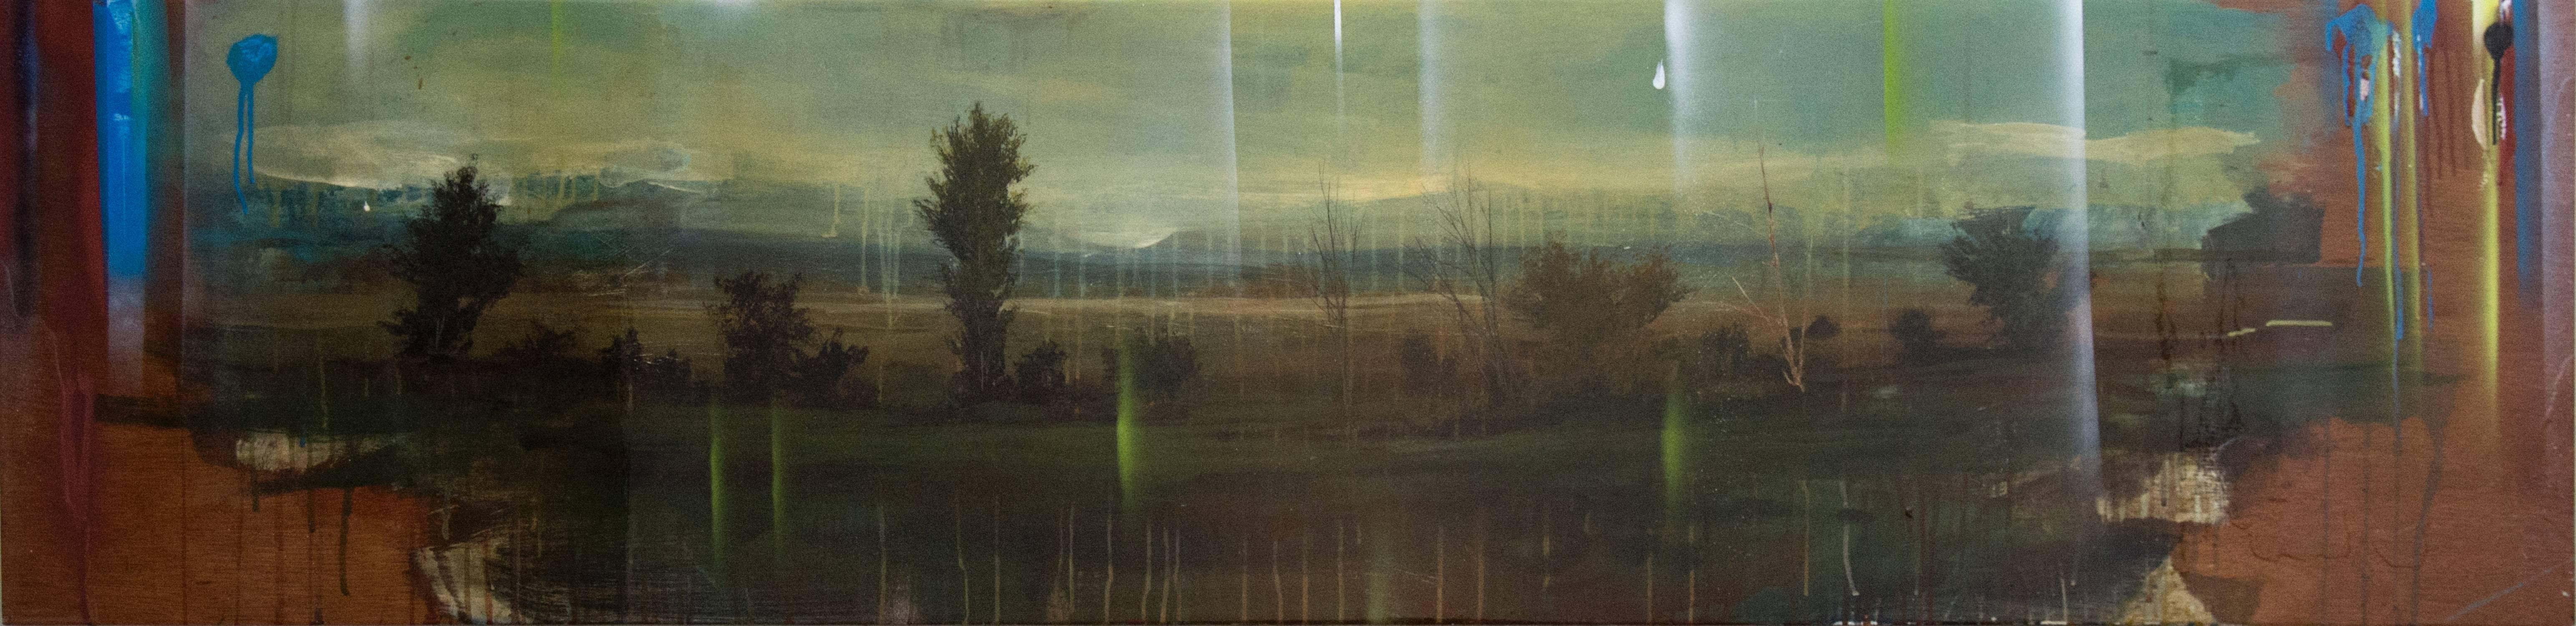 Peter Hoffer Landscape Painting - Panoramic No 1 - green, red, brown, yellow, horizontal, acrylic, resin on board